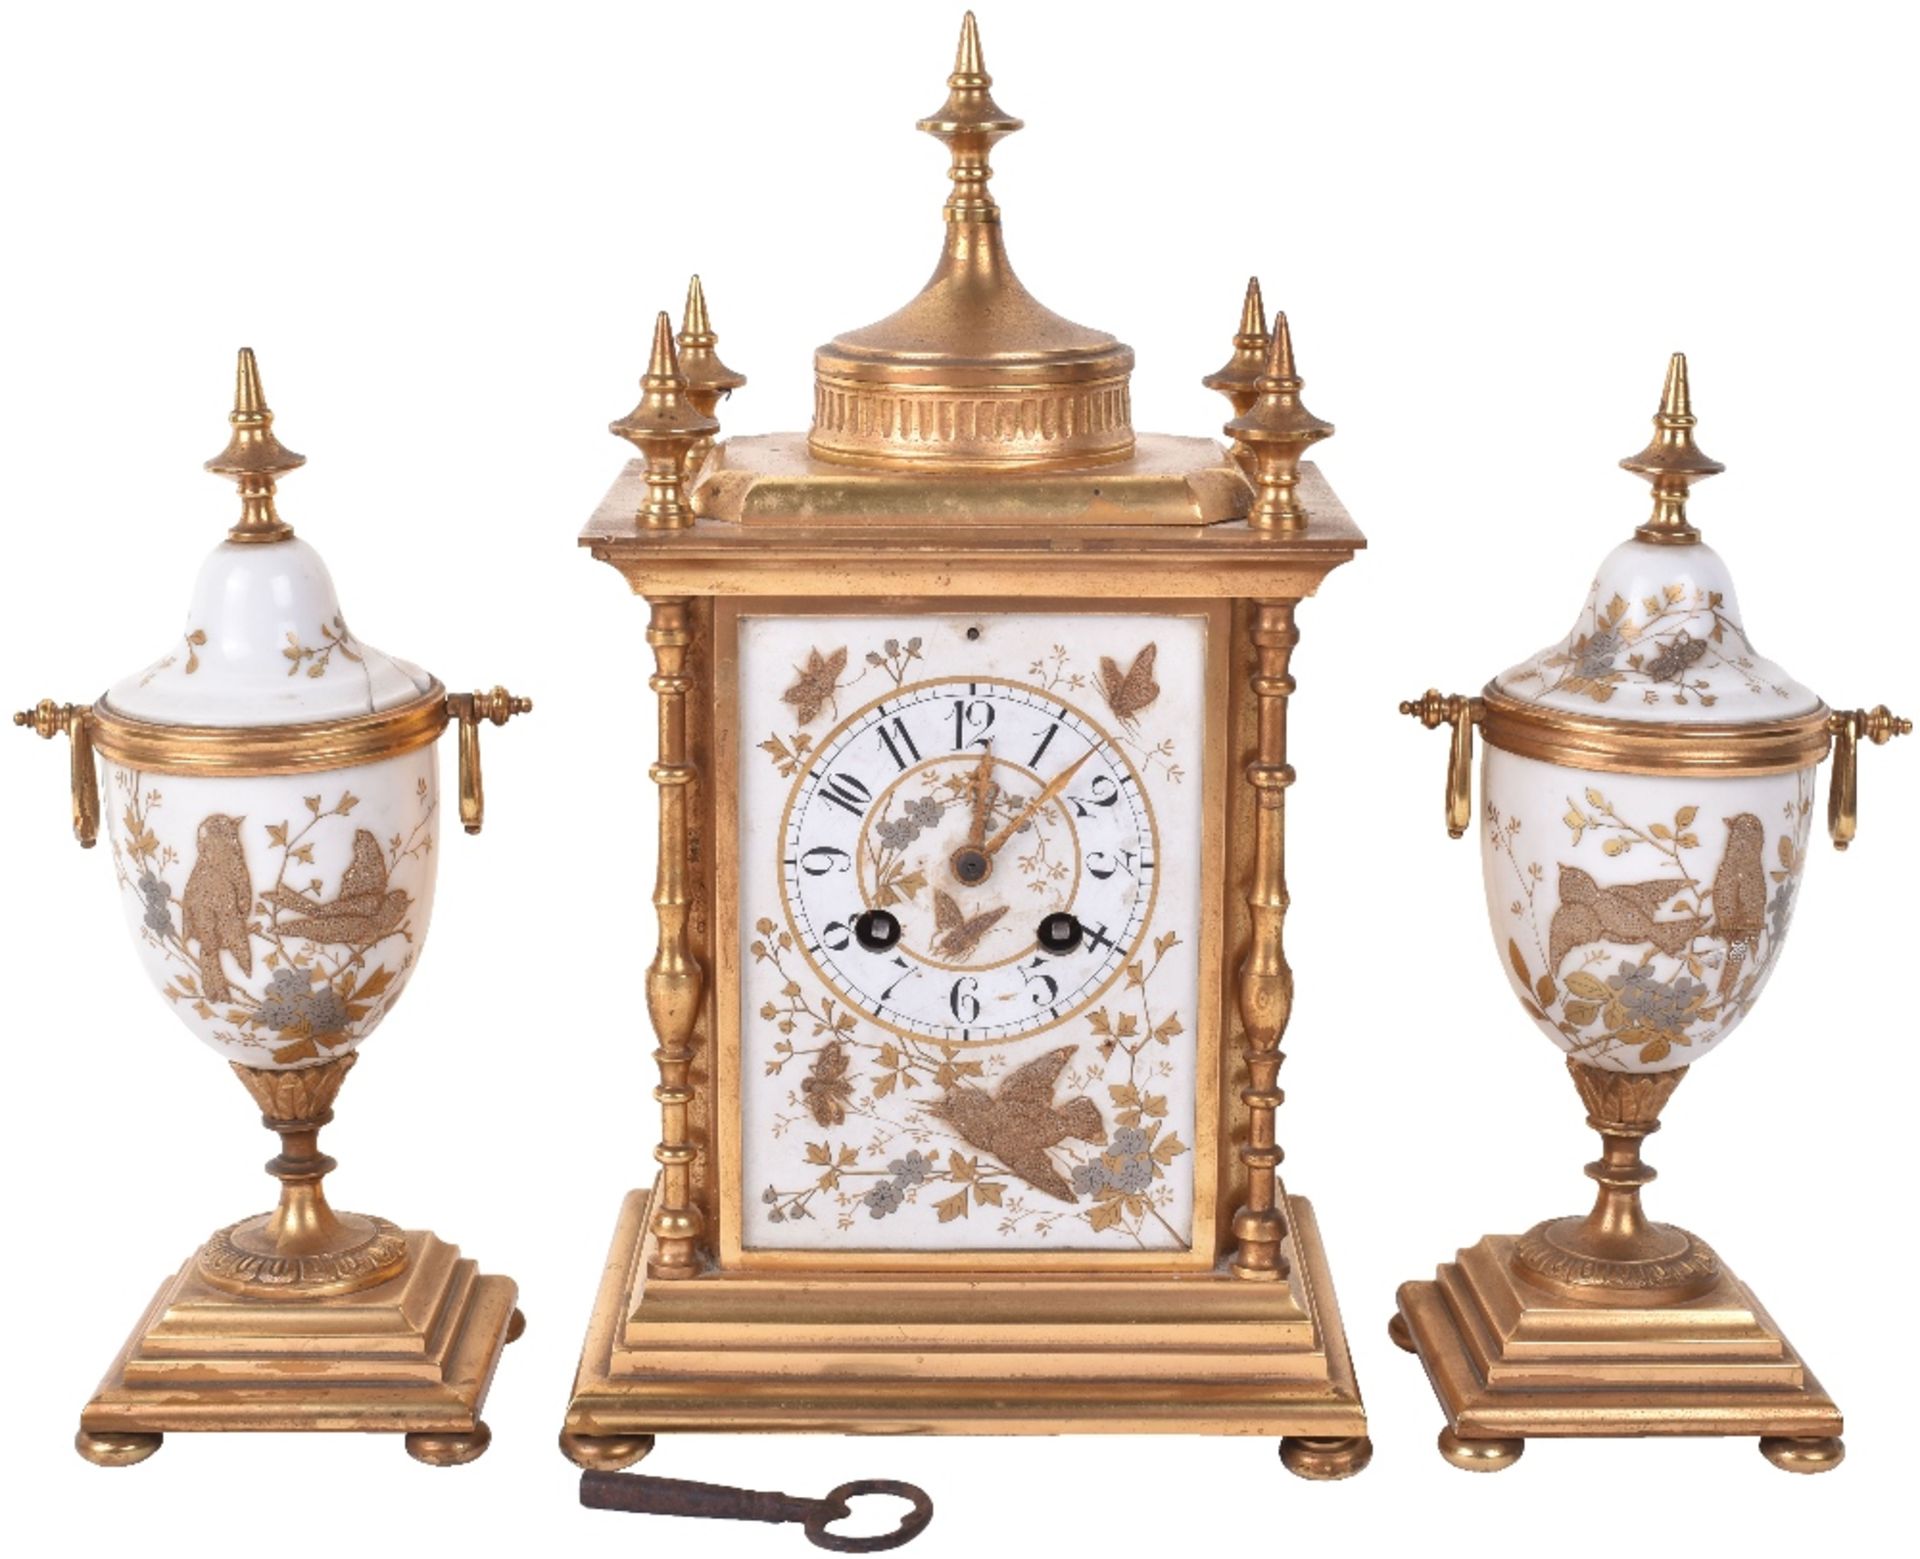 A 19th century French ormulo and porcelain clock garniture, by Japy Freres Paris